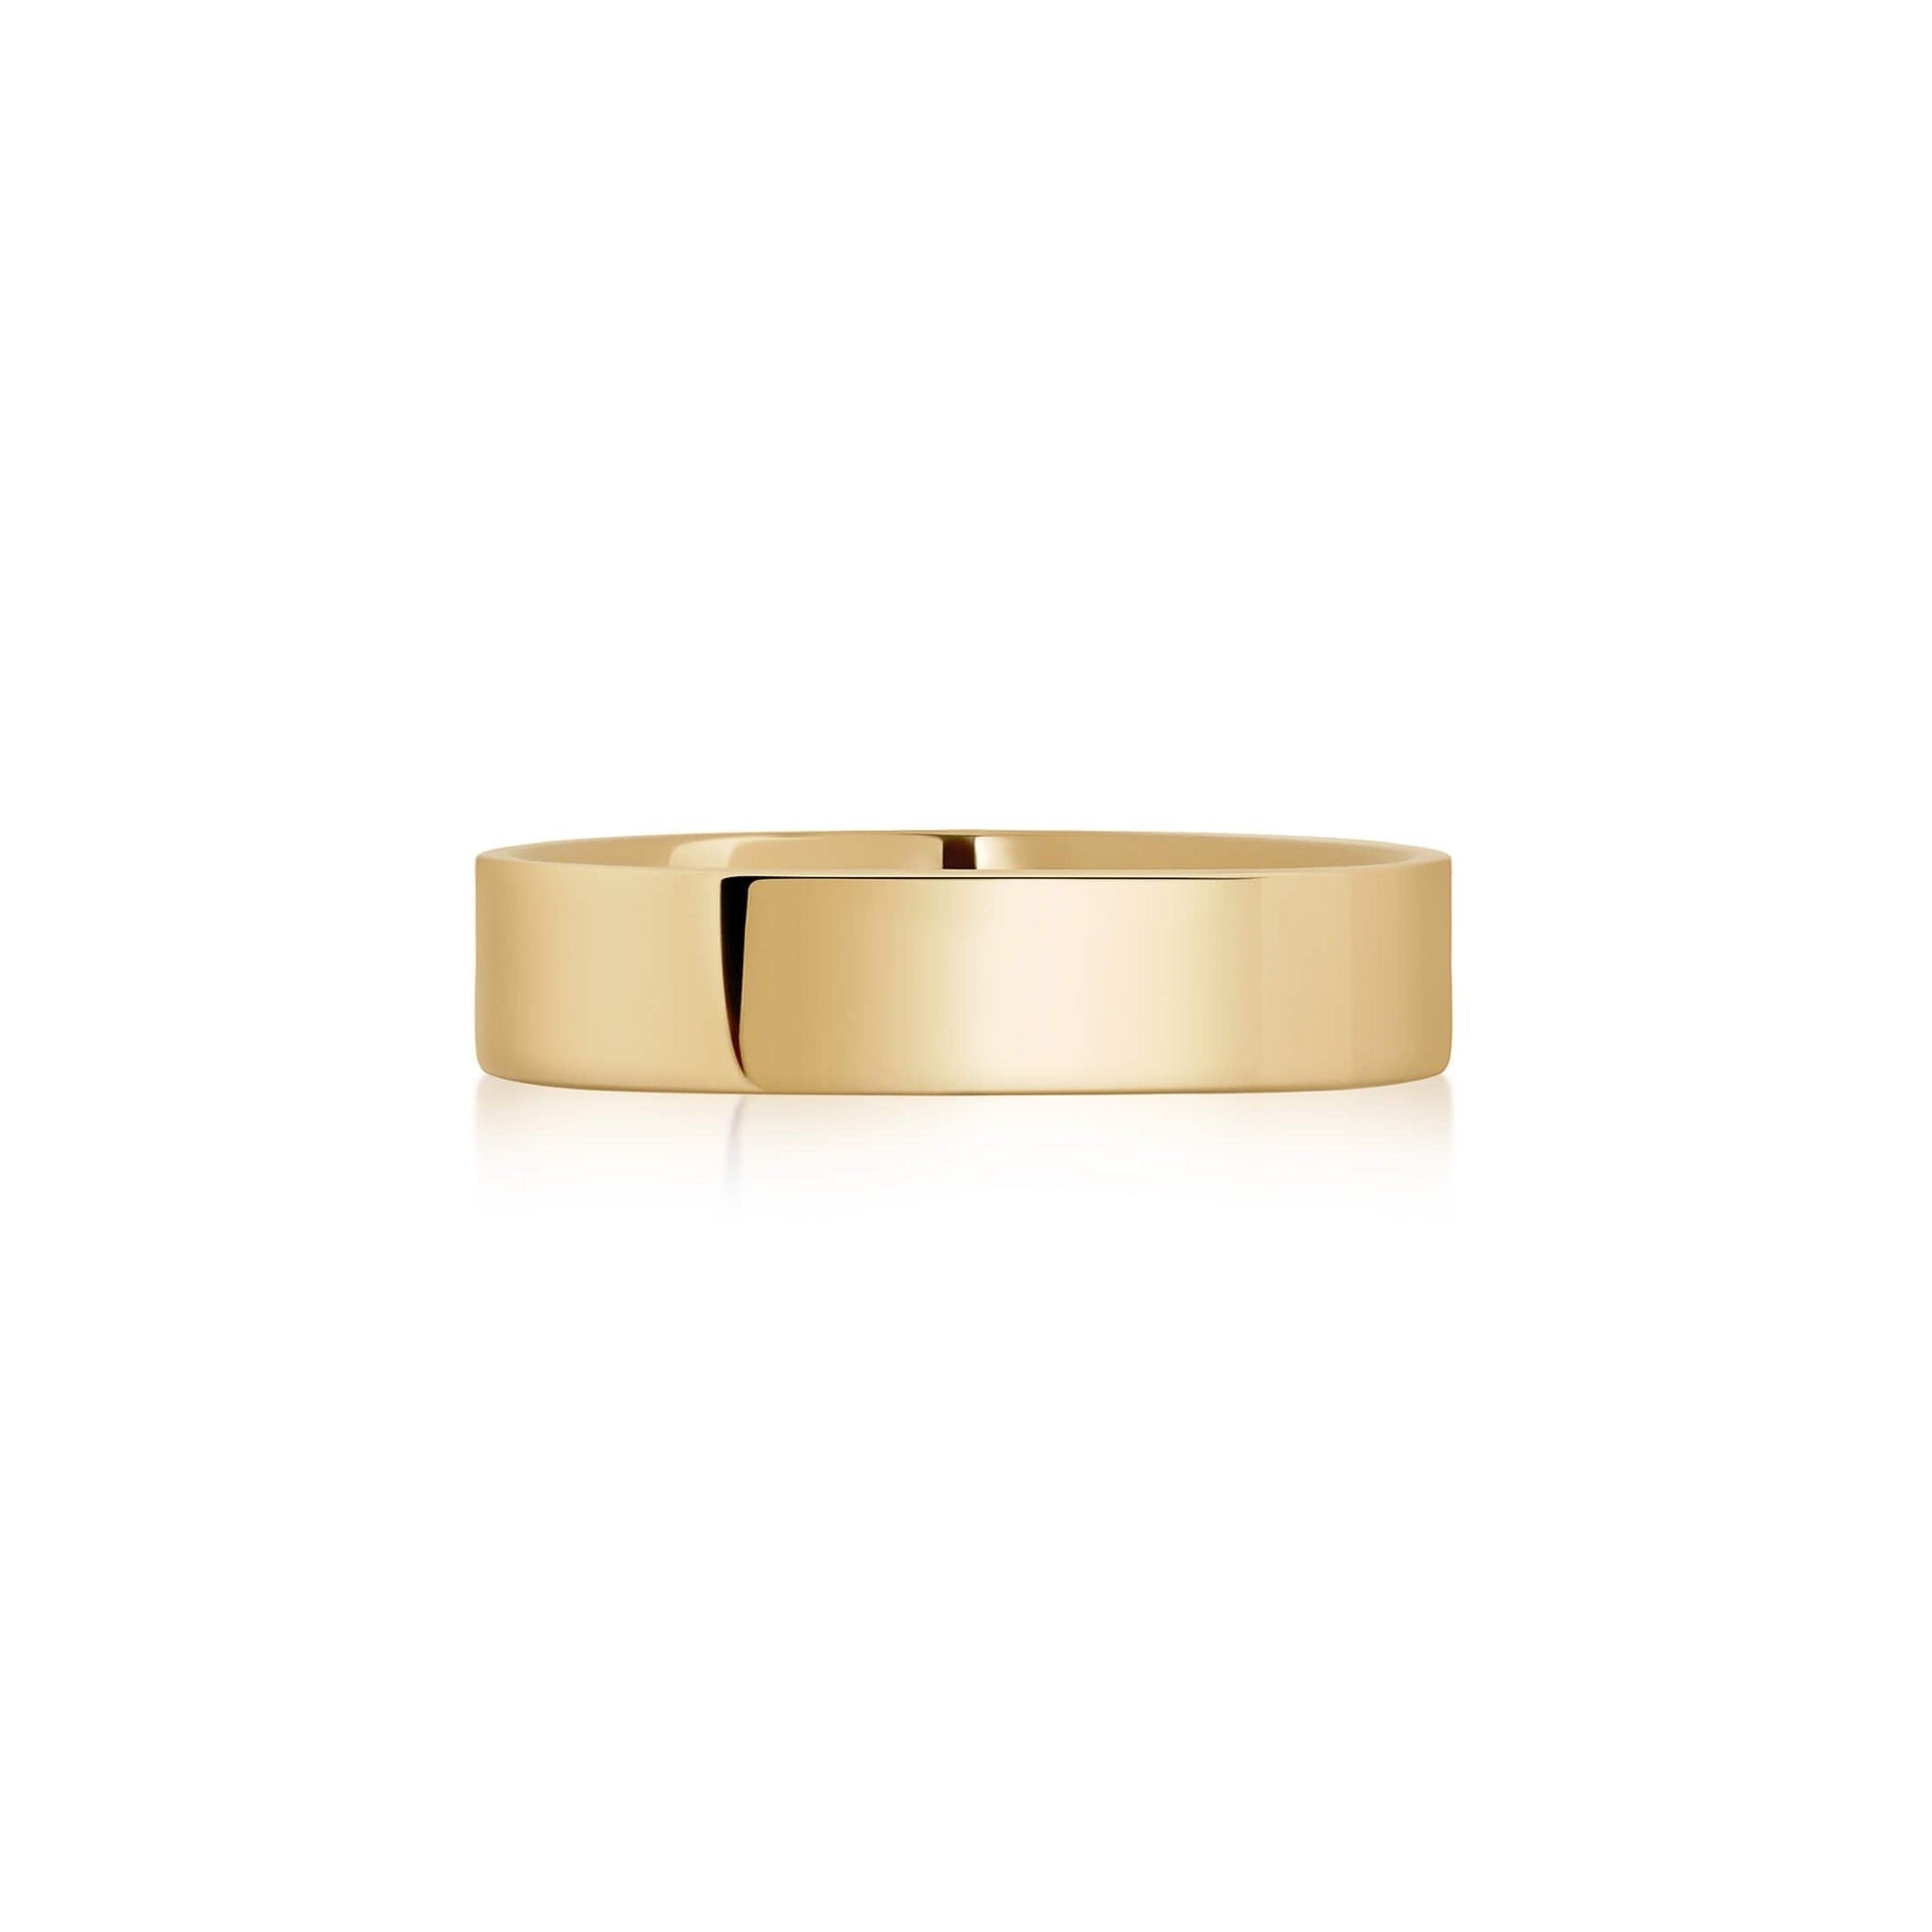 CIGAR BAND (4mm wide) - Trove & Co.